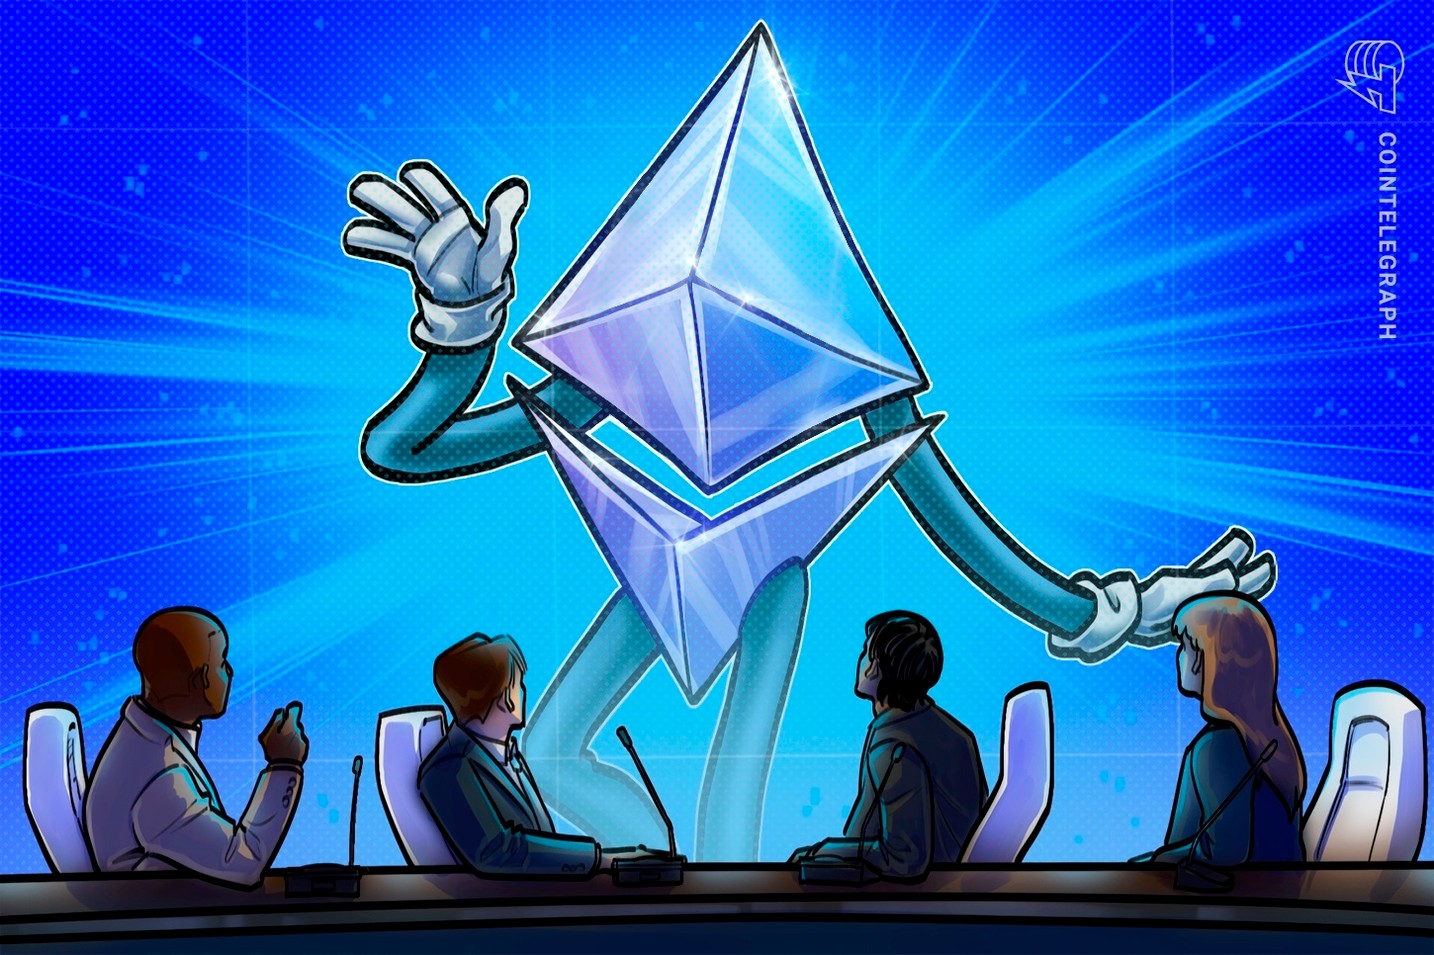 Will the price of ETH follow as Ethereum futures premium reaches a 1-year high?